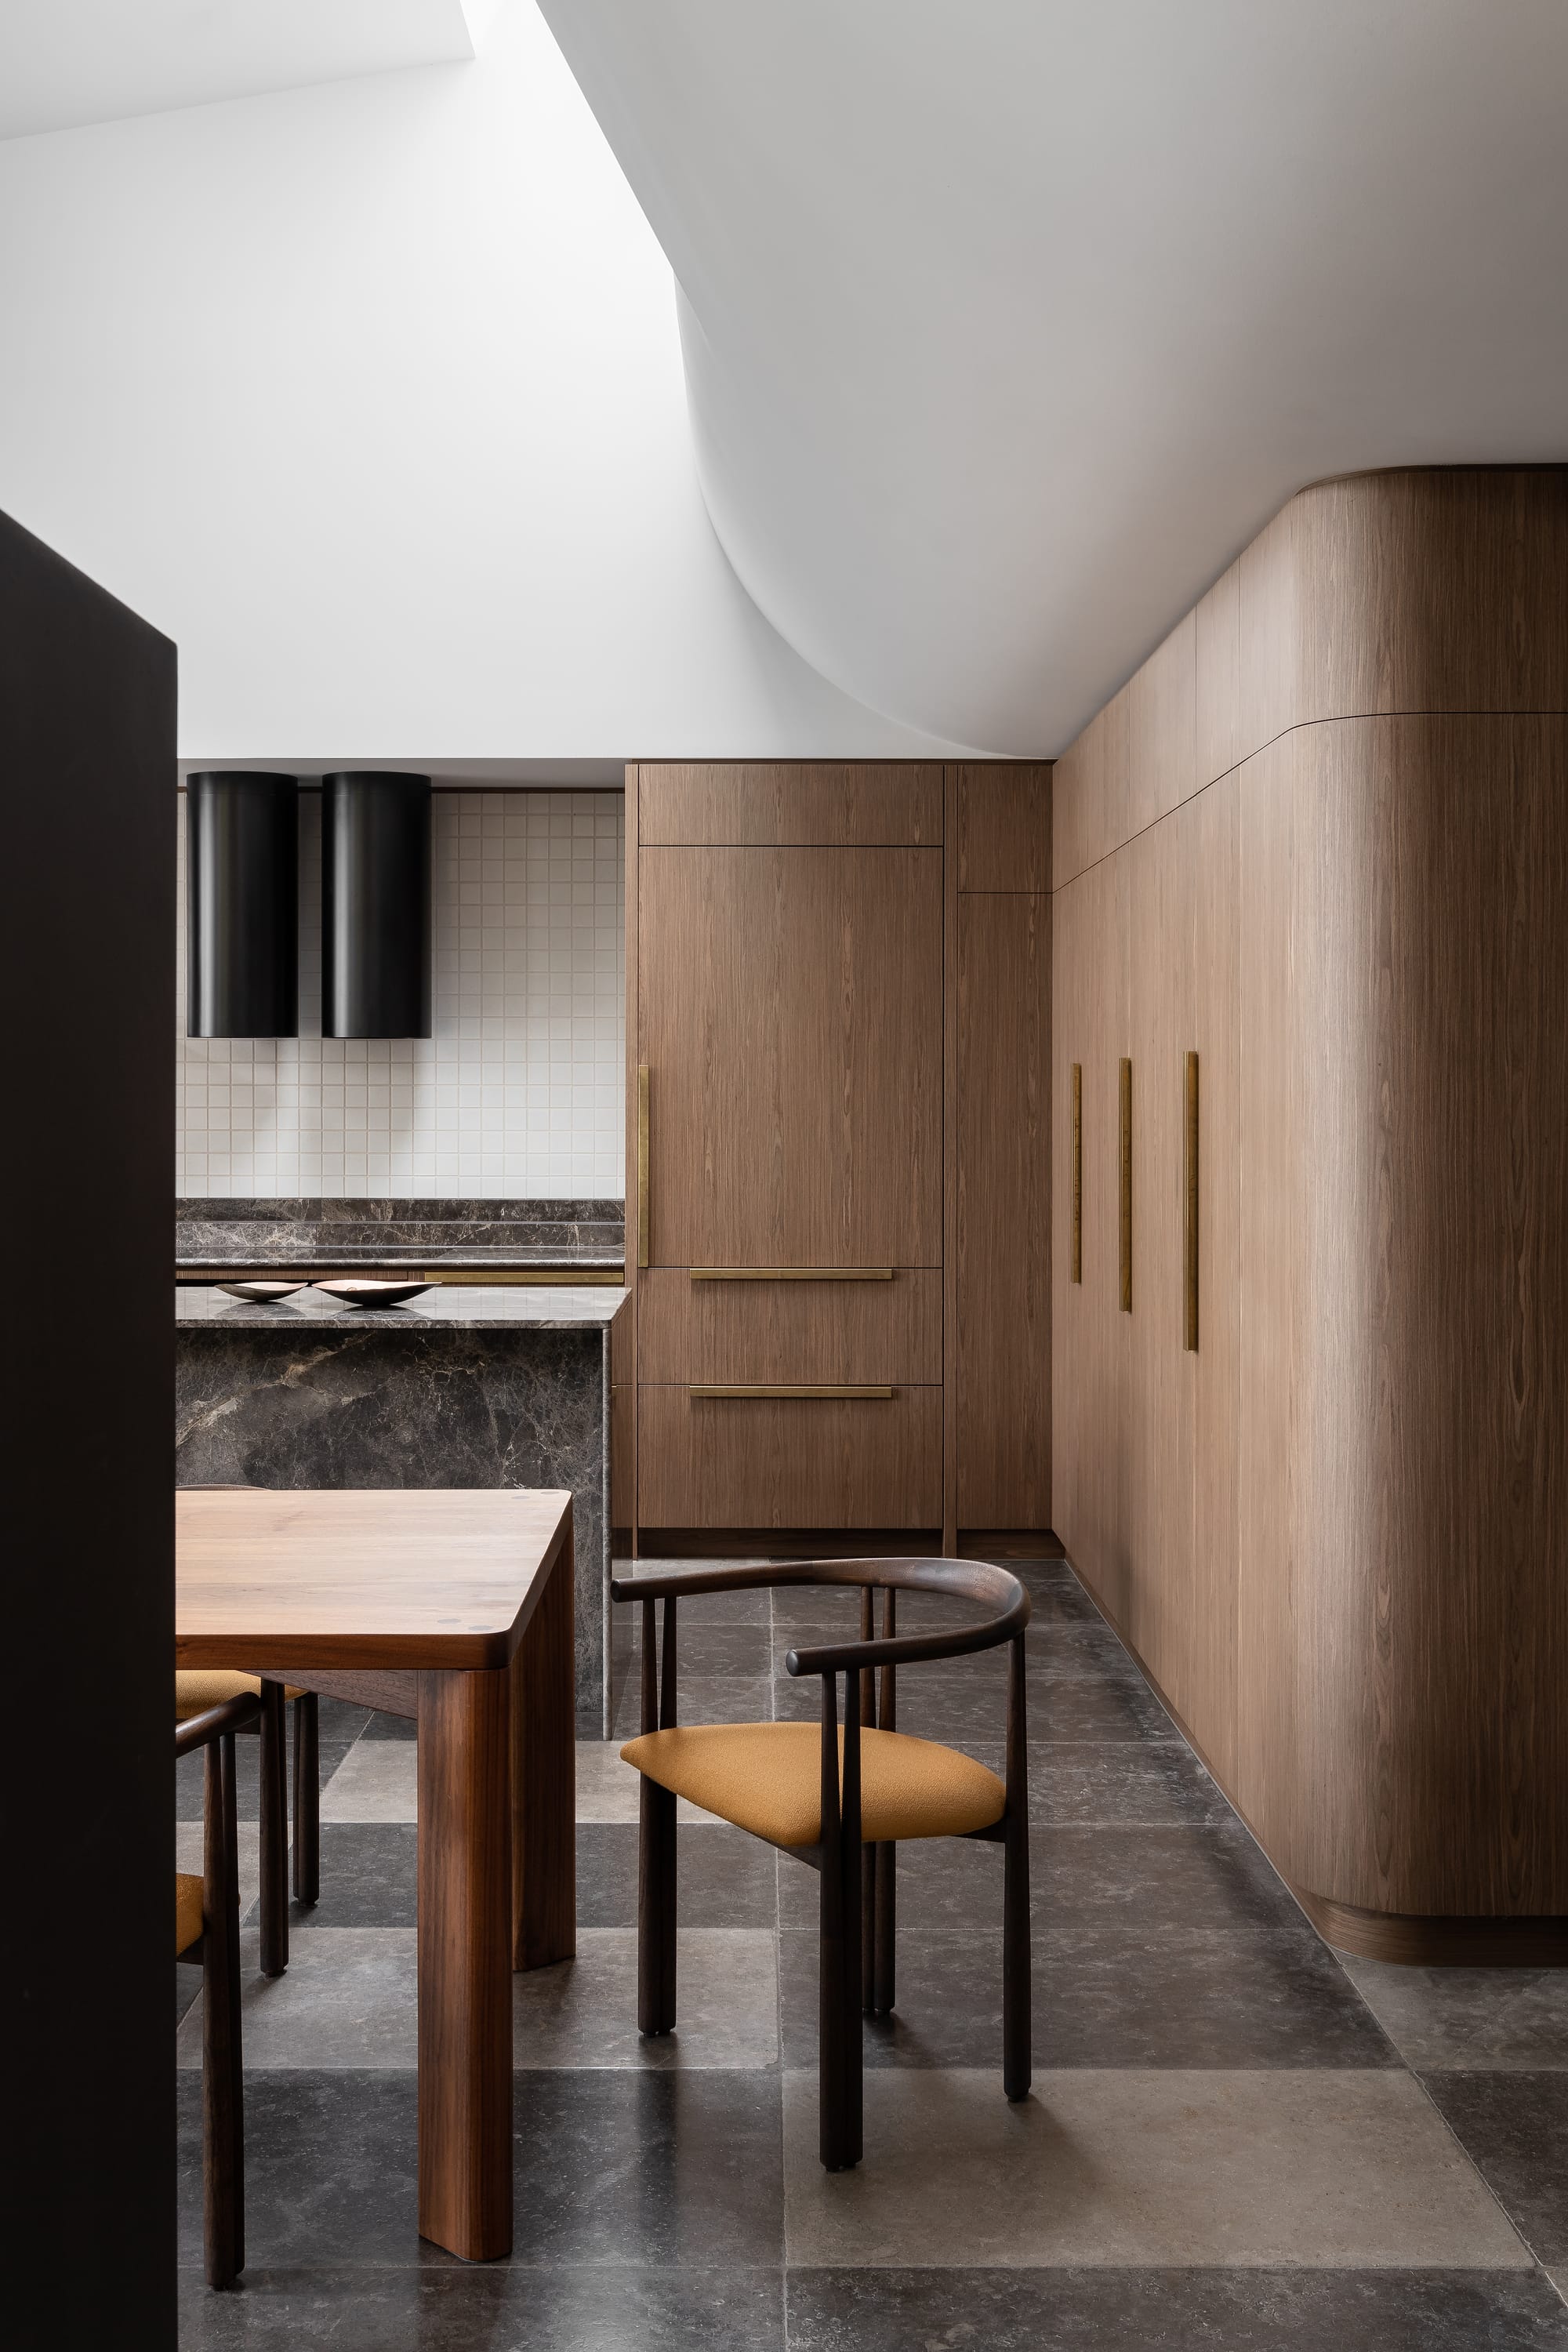 Rose Park by studio gram. Photography by Timothy Ross. Residential kitchen with checkerboard stone floors. Timber cabinetry with curved edges. Grey granite counters and countertops. White tile splashback. 